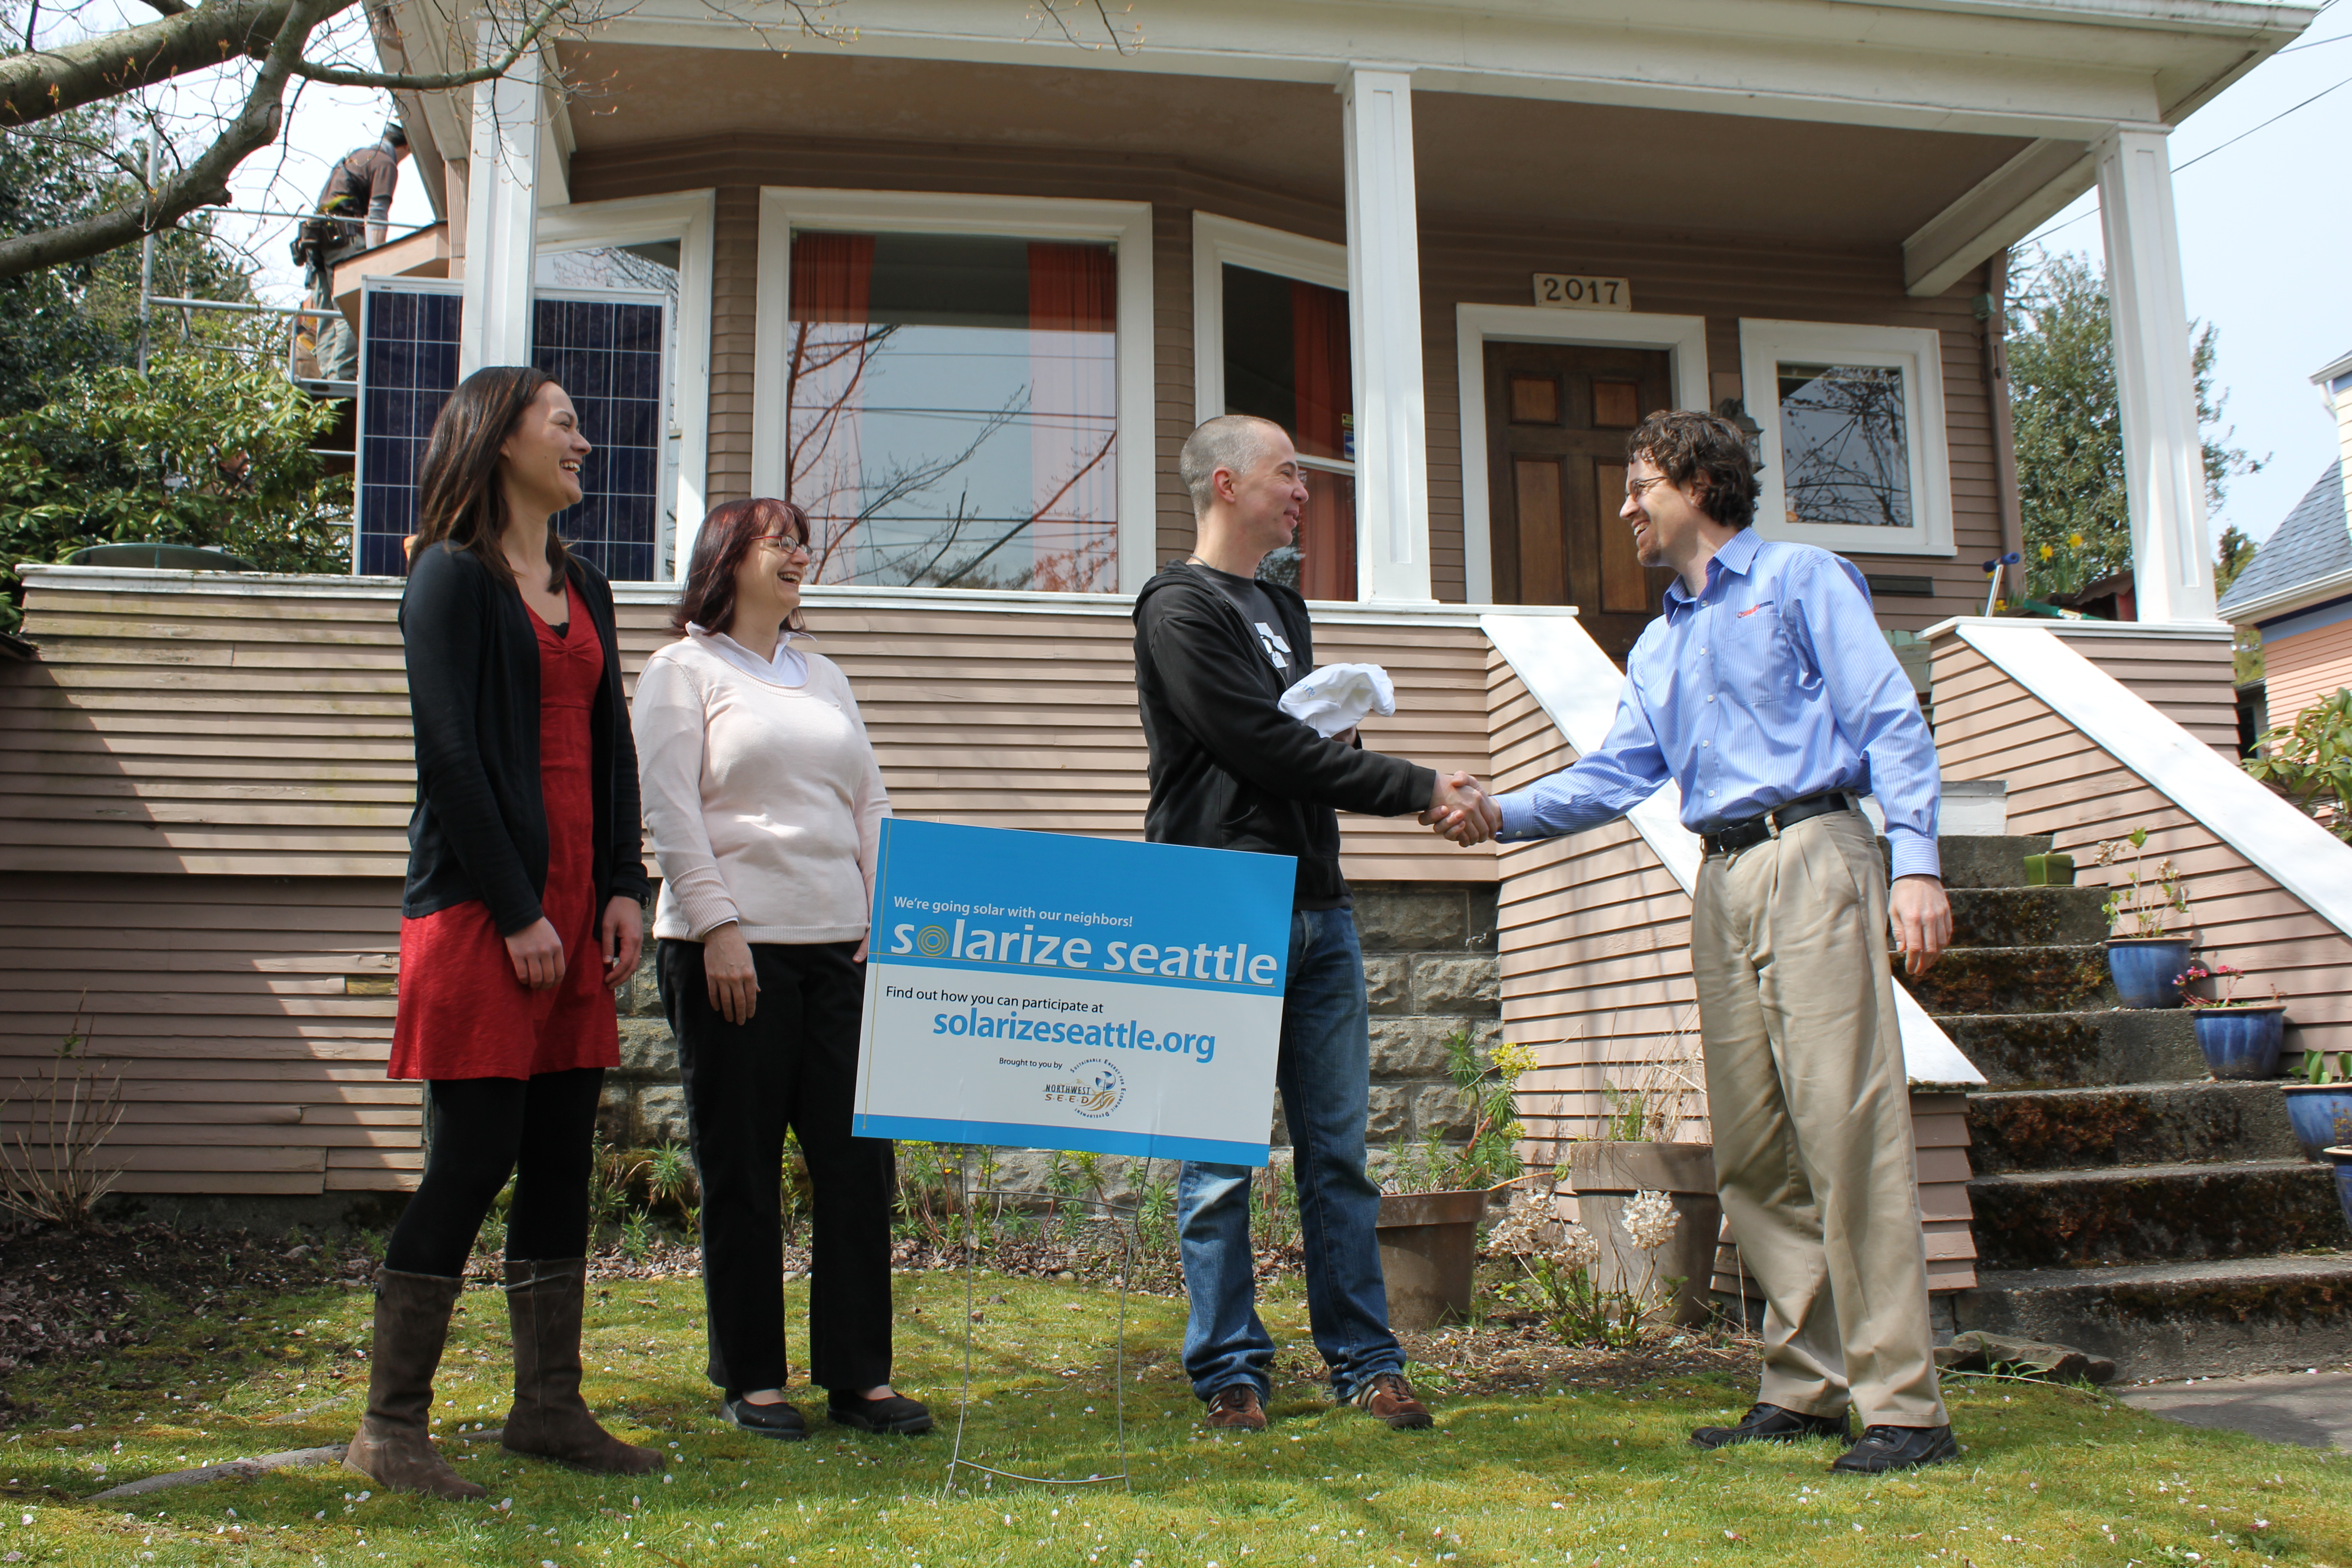 two male and two female adulst in fromnt of beige colored house. The men are shaking hands in from of a Solarize Seattle lawn sign. All people are smiling.